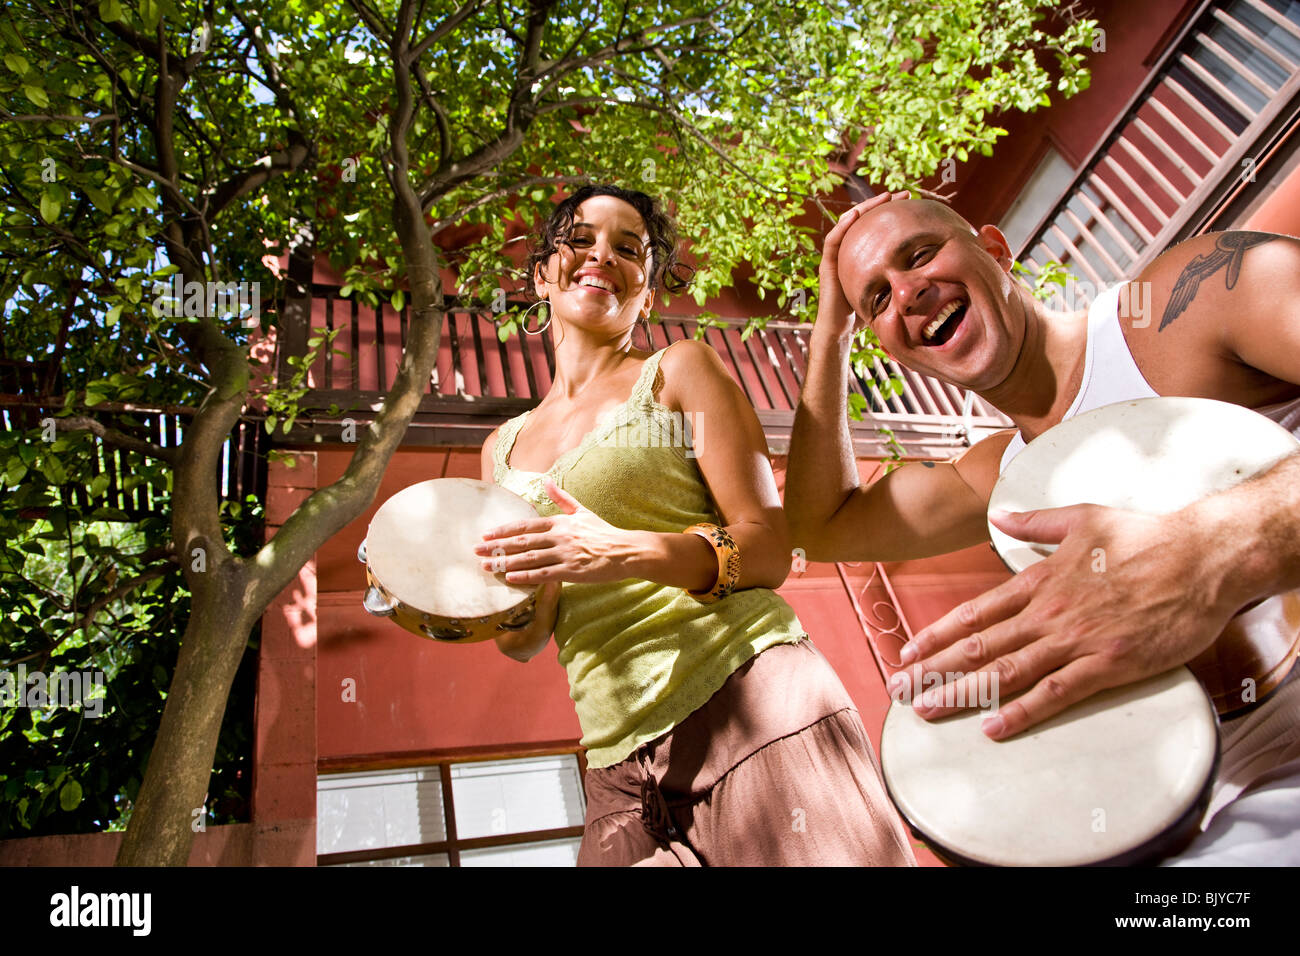 Young couple making music together outdoors Stock Photo